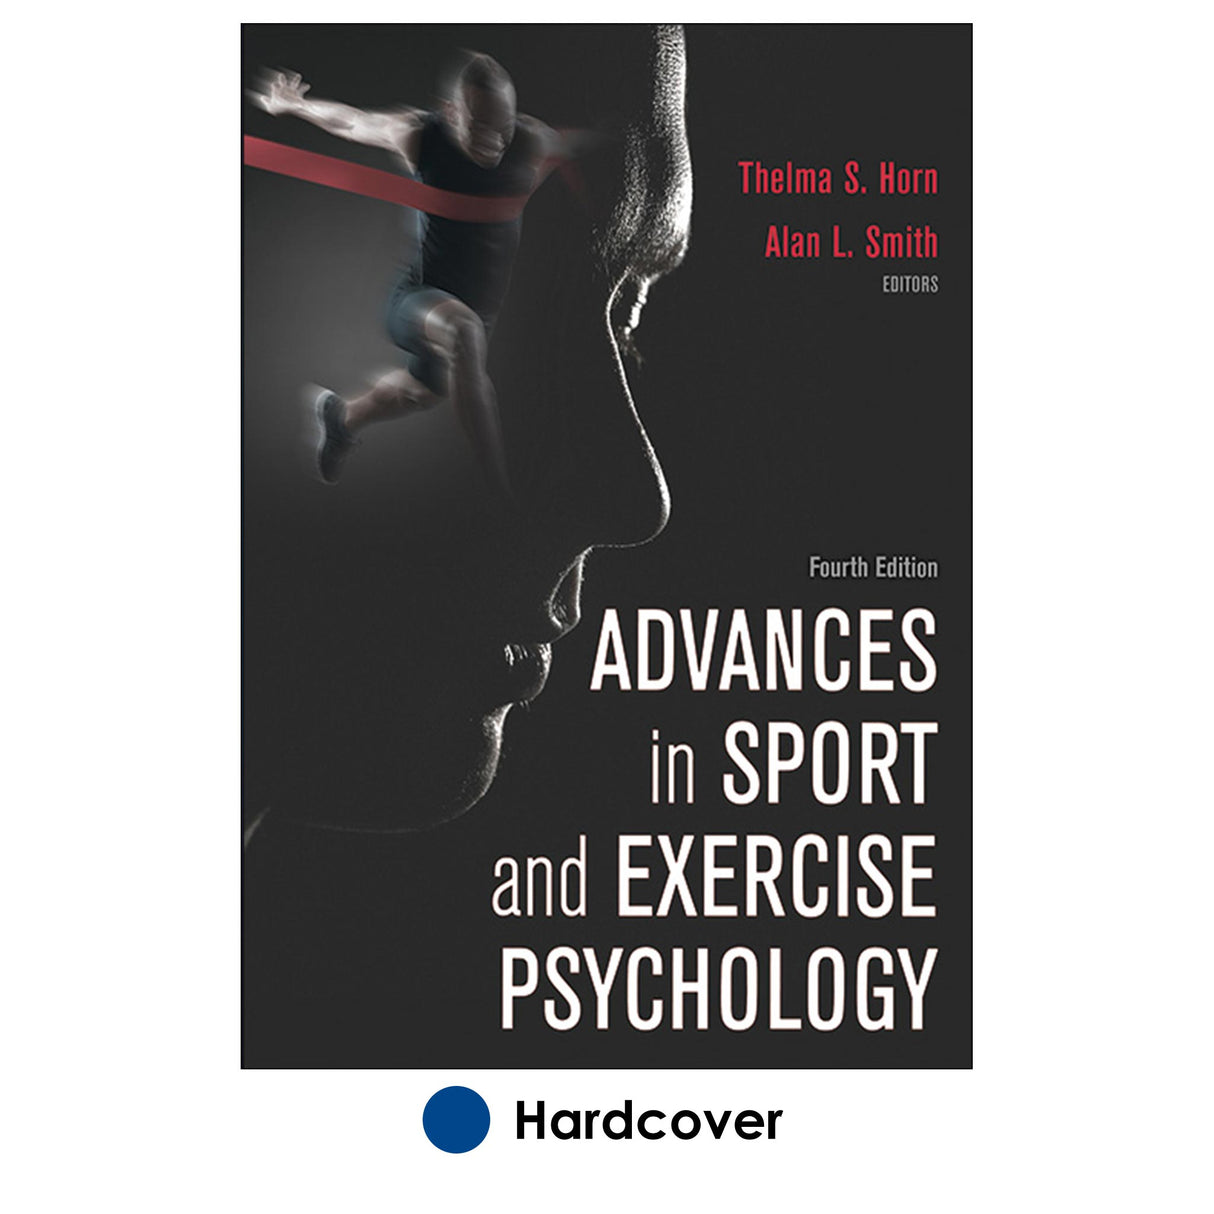 Advances in Sport and Exercise Psychology-4th Edition